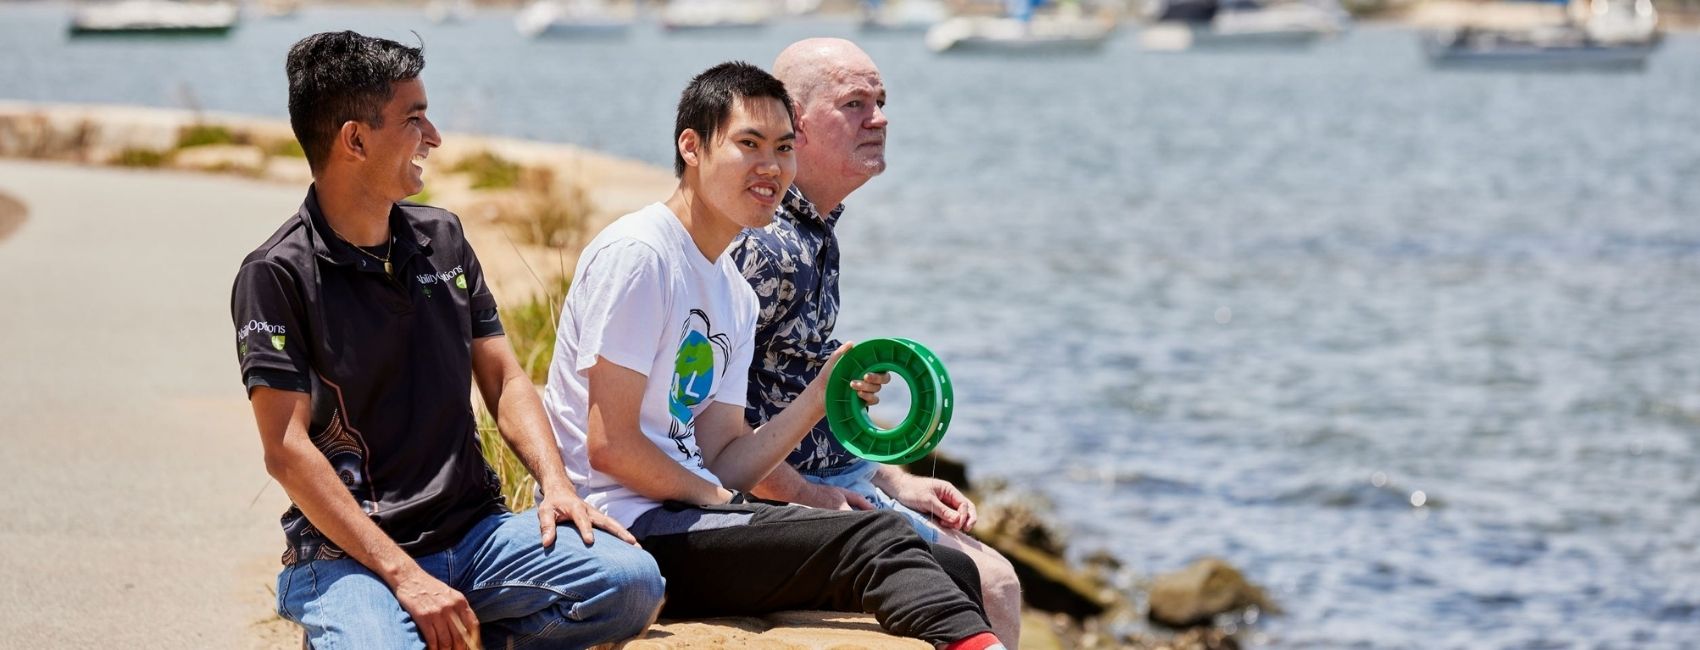 Two participants hanging out near the water with fishing line supported by an Ability Options staff member